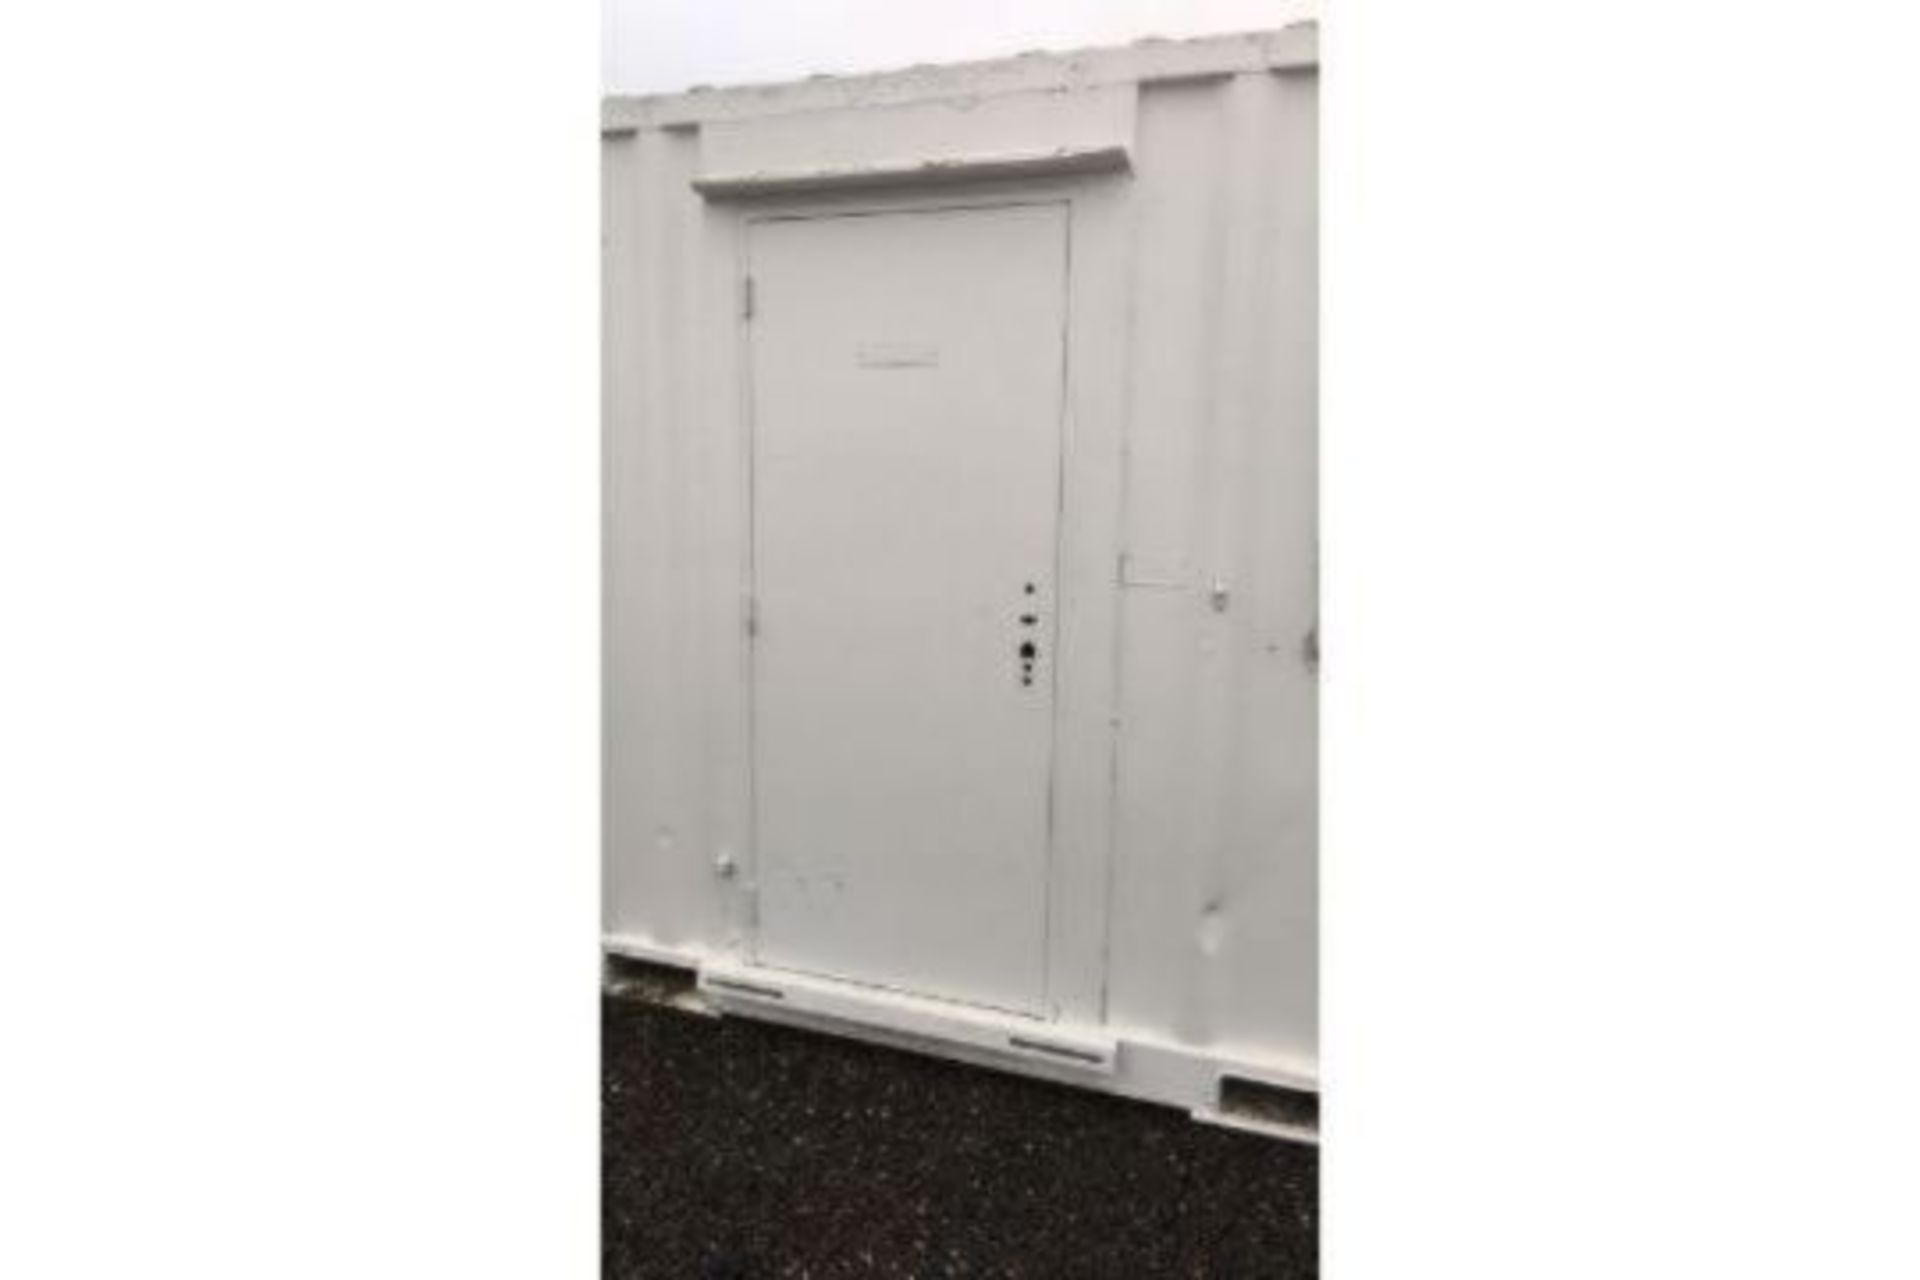 Welfare unit 25ft A627585 - Image 2 of 9